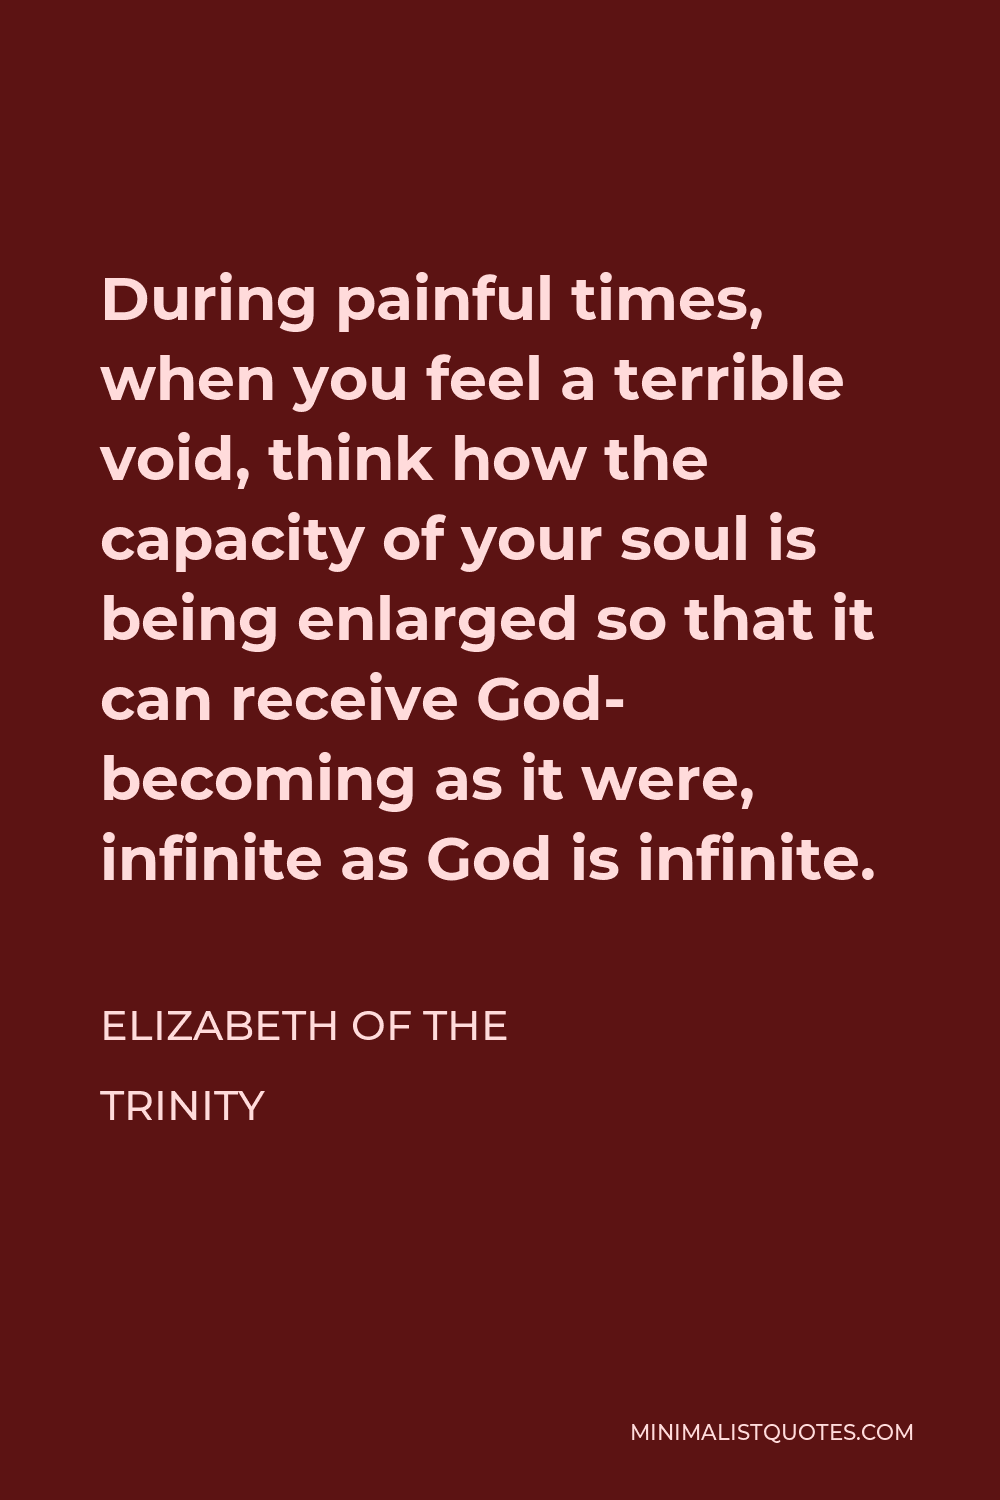 Elizabeth of the Trinity Quote - During painful times, when you feel a terrible void, think how the capacity of your soul is being enlarged so that it can receive God- becoming as it were, infinite as God is infinite.